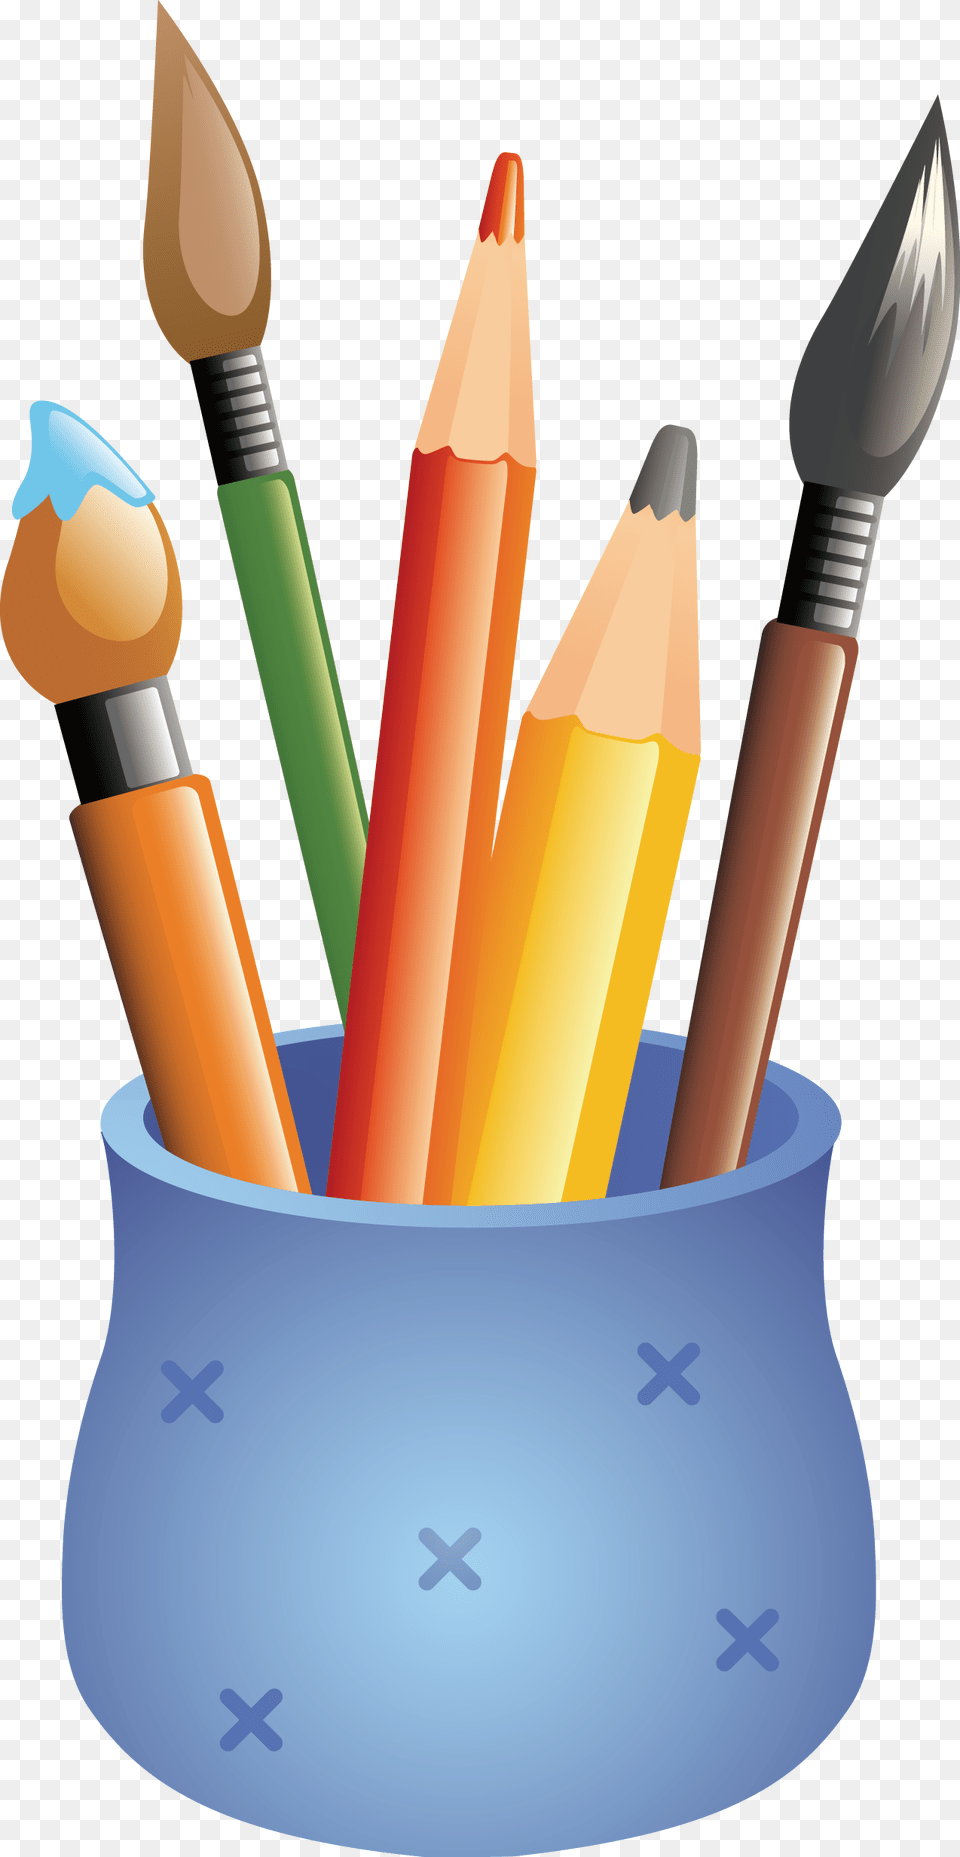 Jpg Library Library America Drawing Colored Pencil Colour Pencil Hd, Smoke Pipe Free Transparent Png